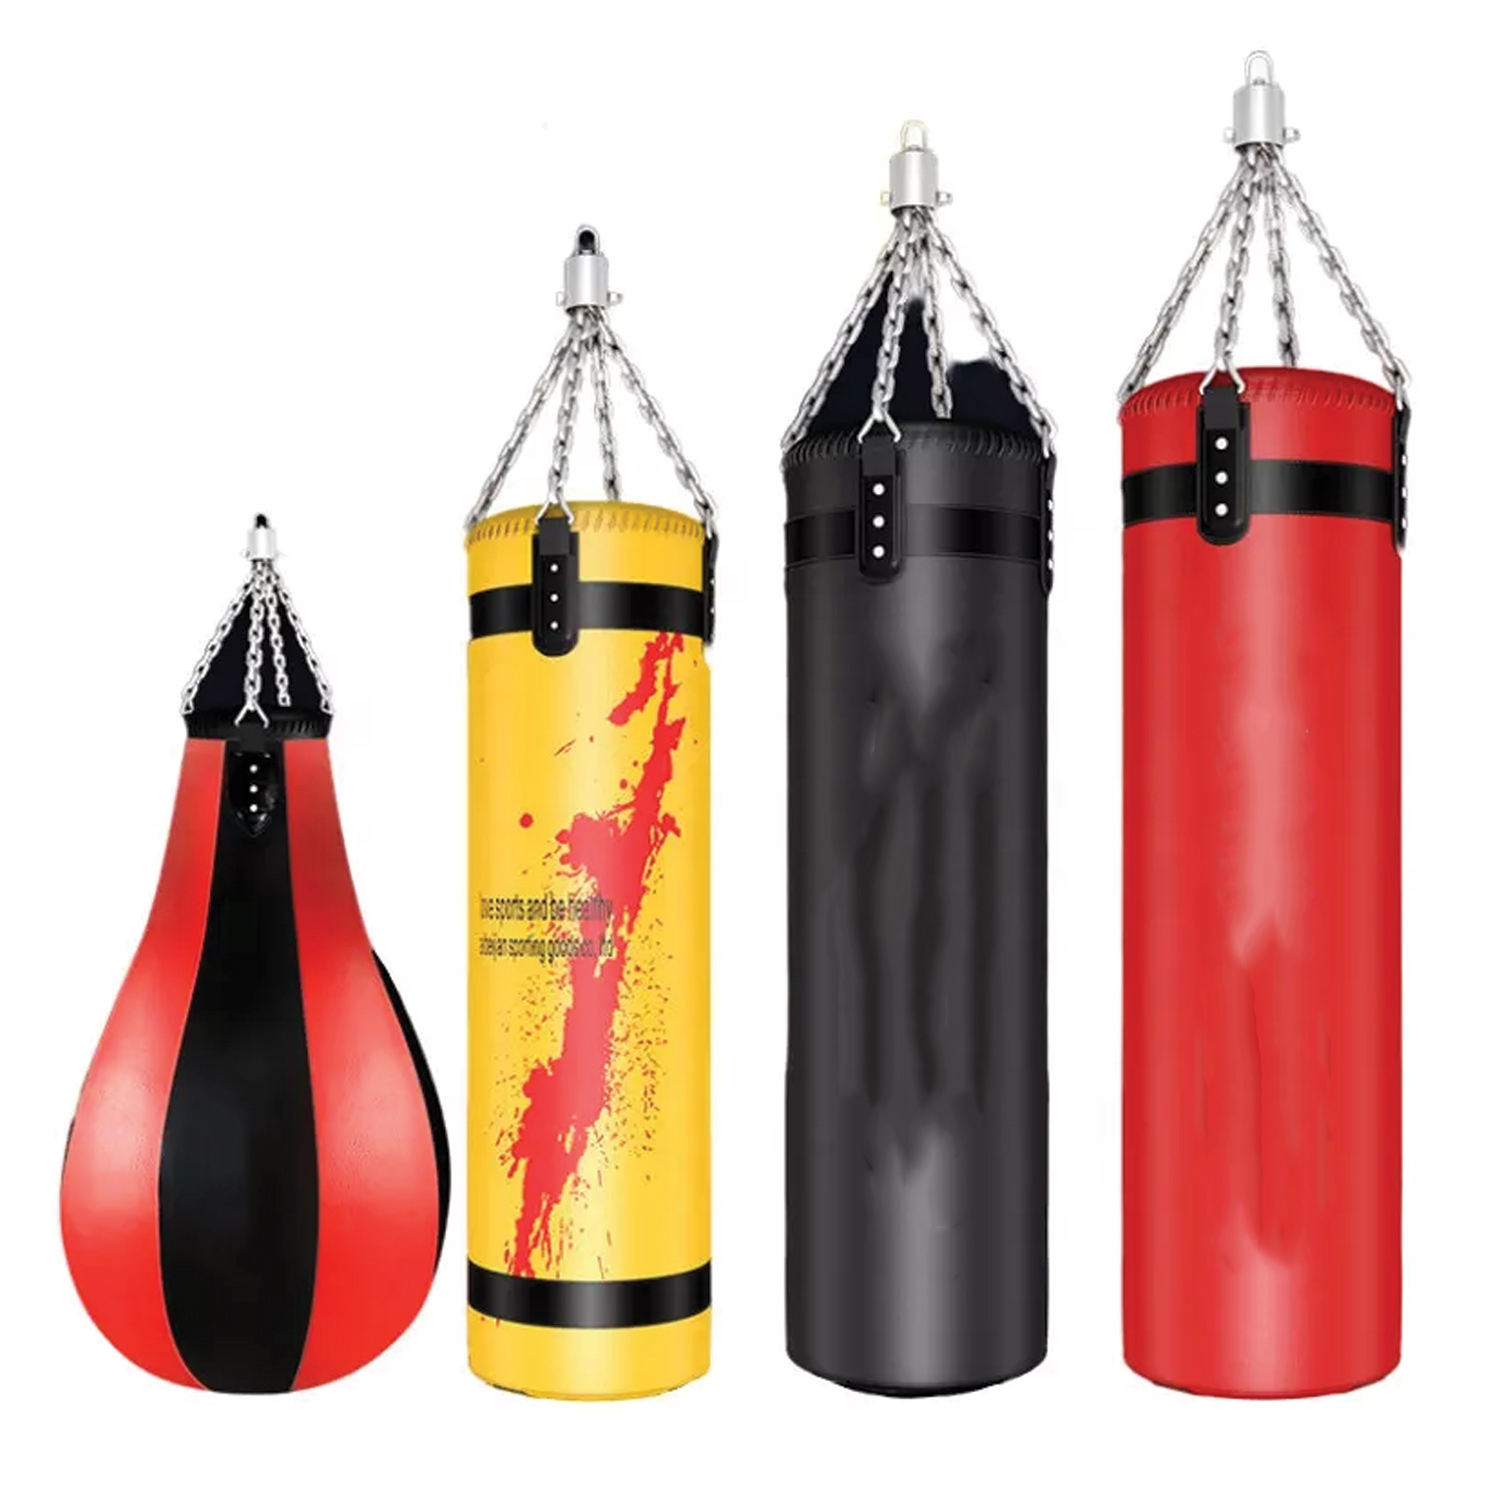 Discount Price Agility Hurdles Ladder -
 High Quality Punching Heavy Boxing Sandbag And Punching Bag – Rise Group